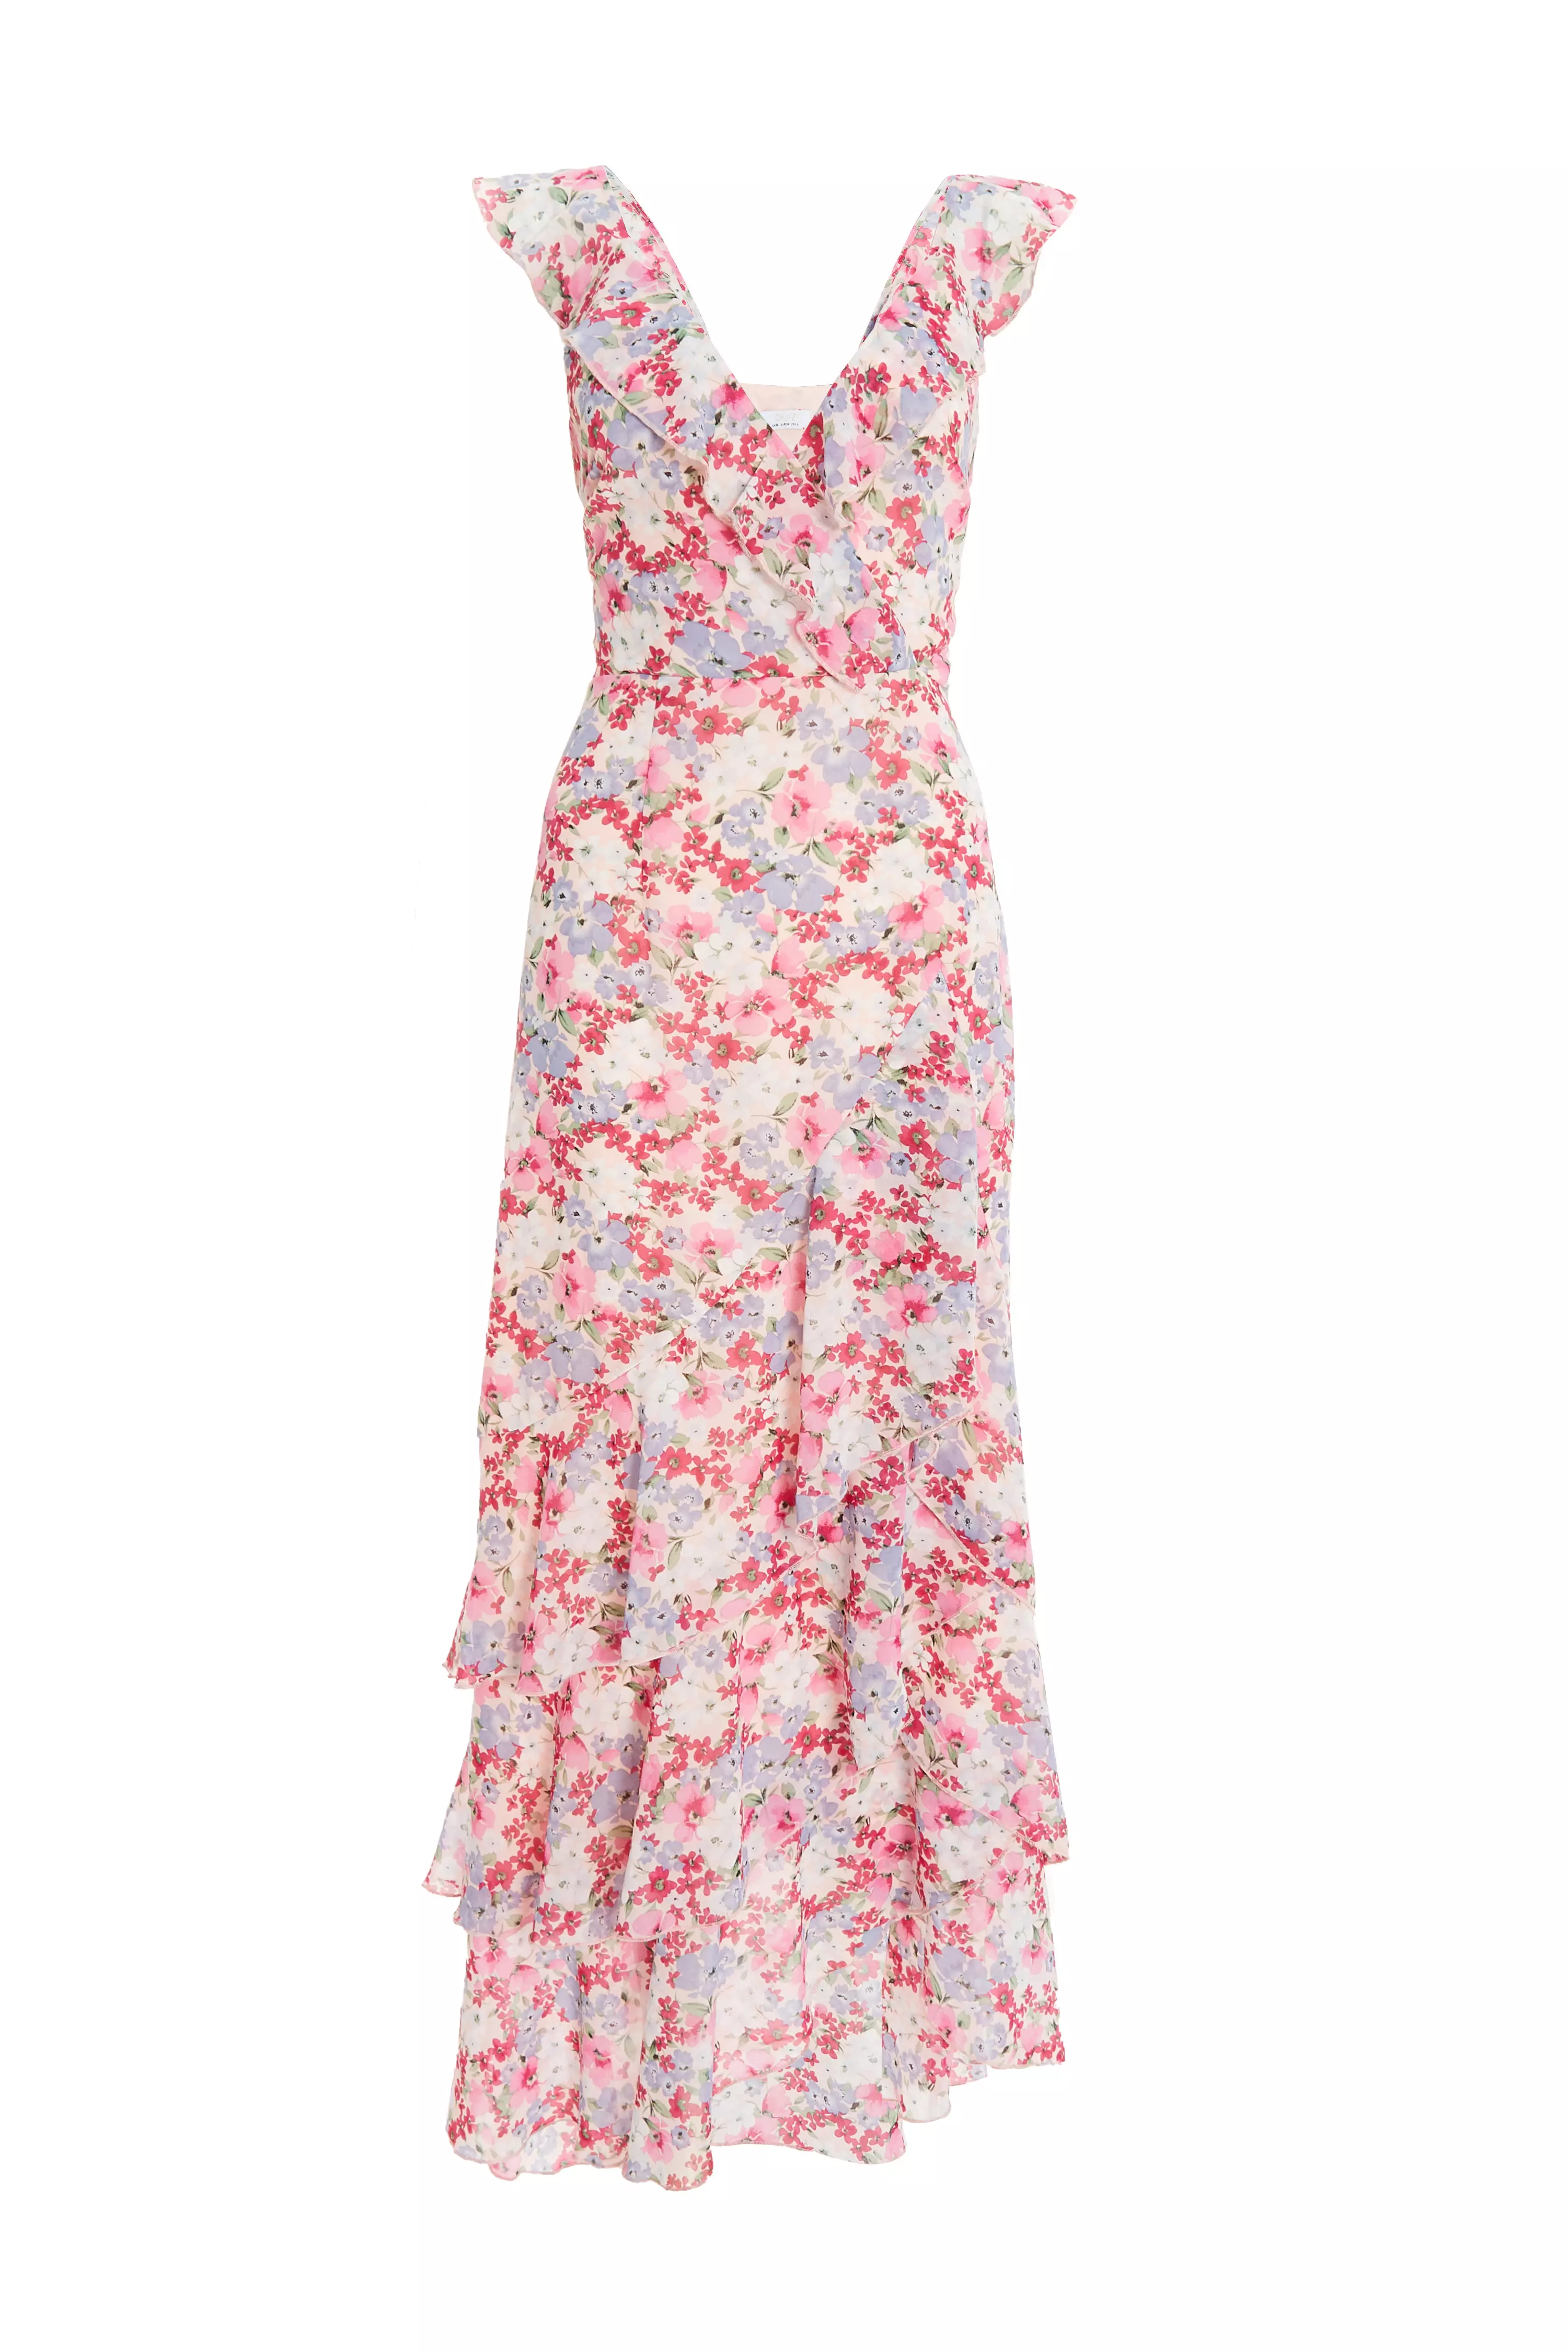 Multicoloured Chiffon Floral Tiered Maxi Dress - QUIZ Clothing